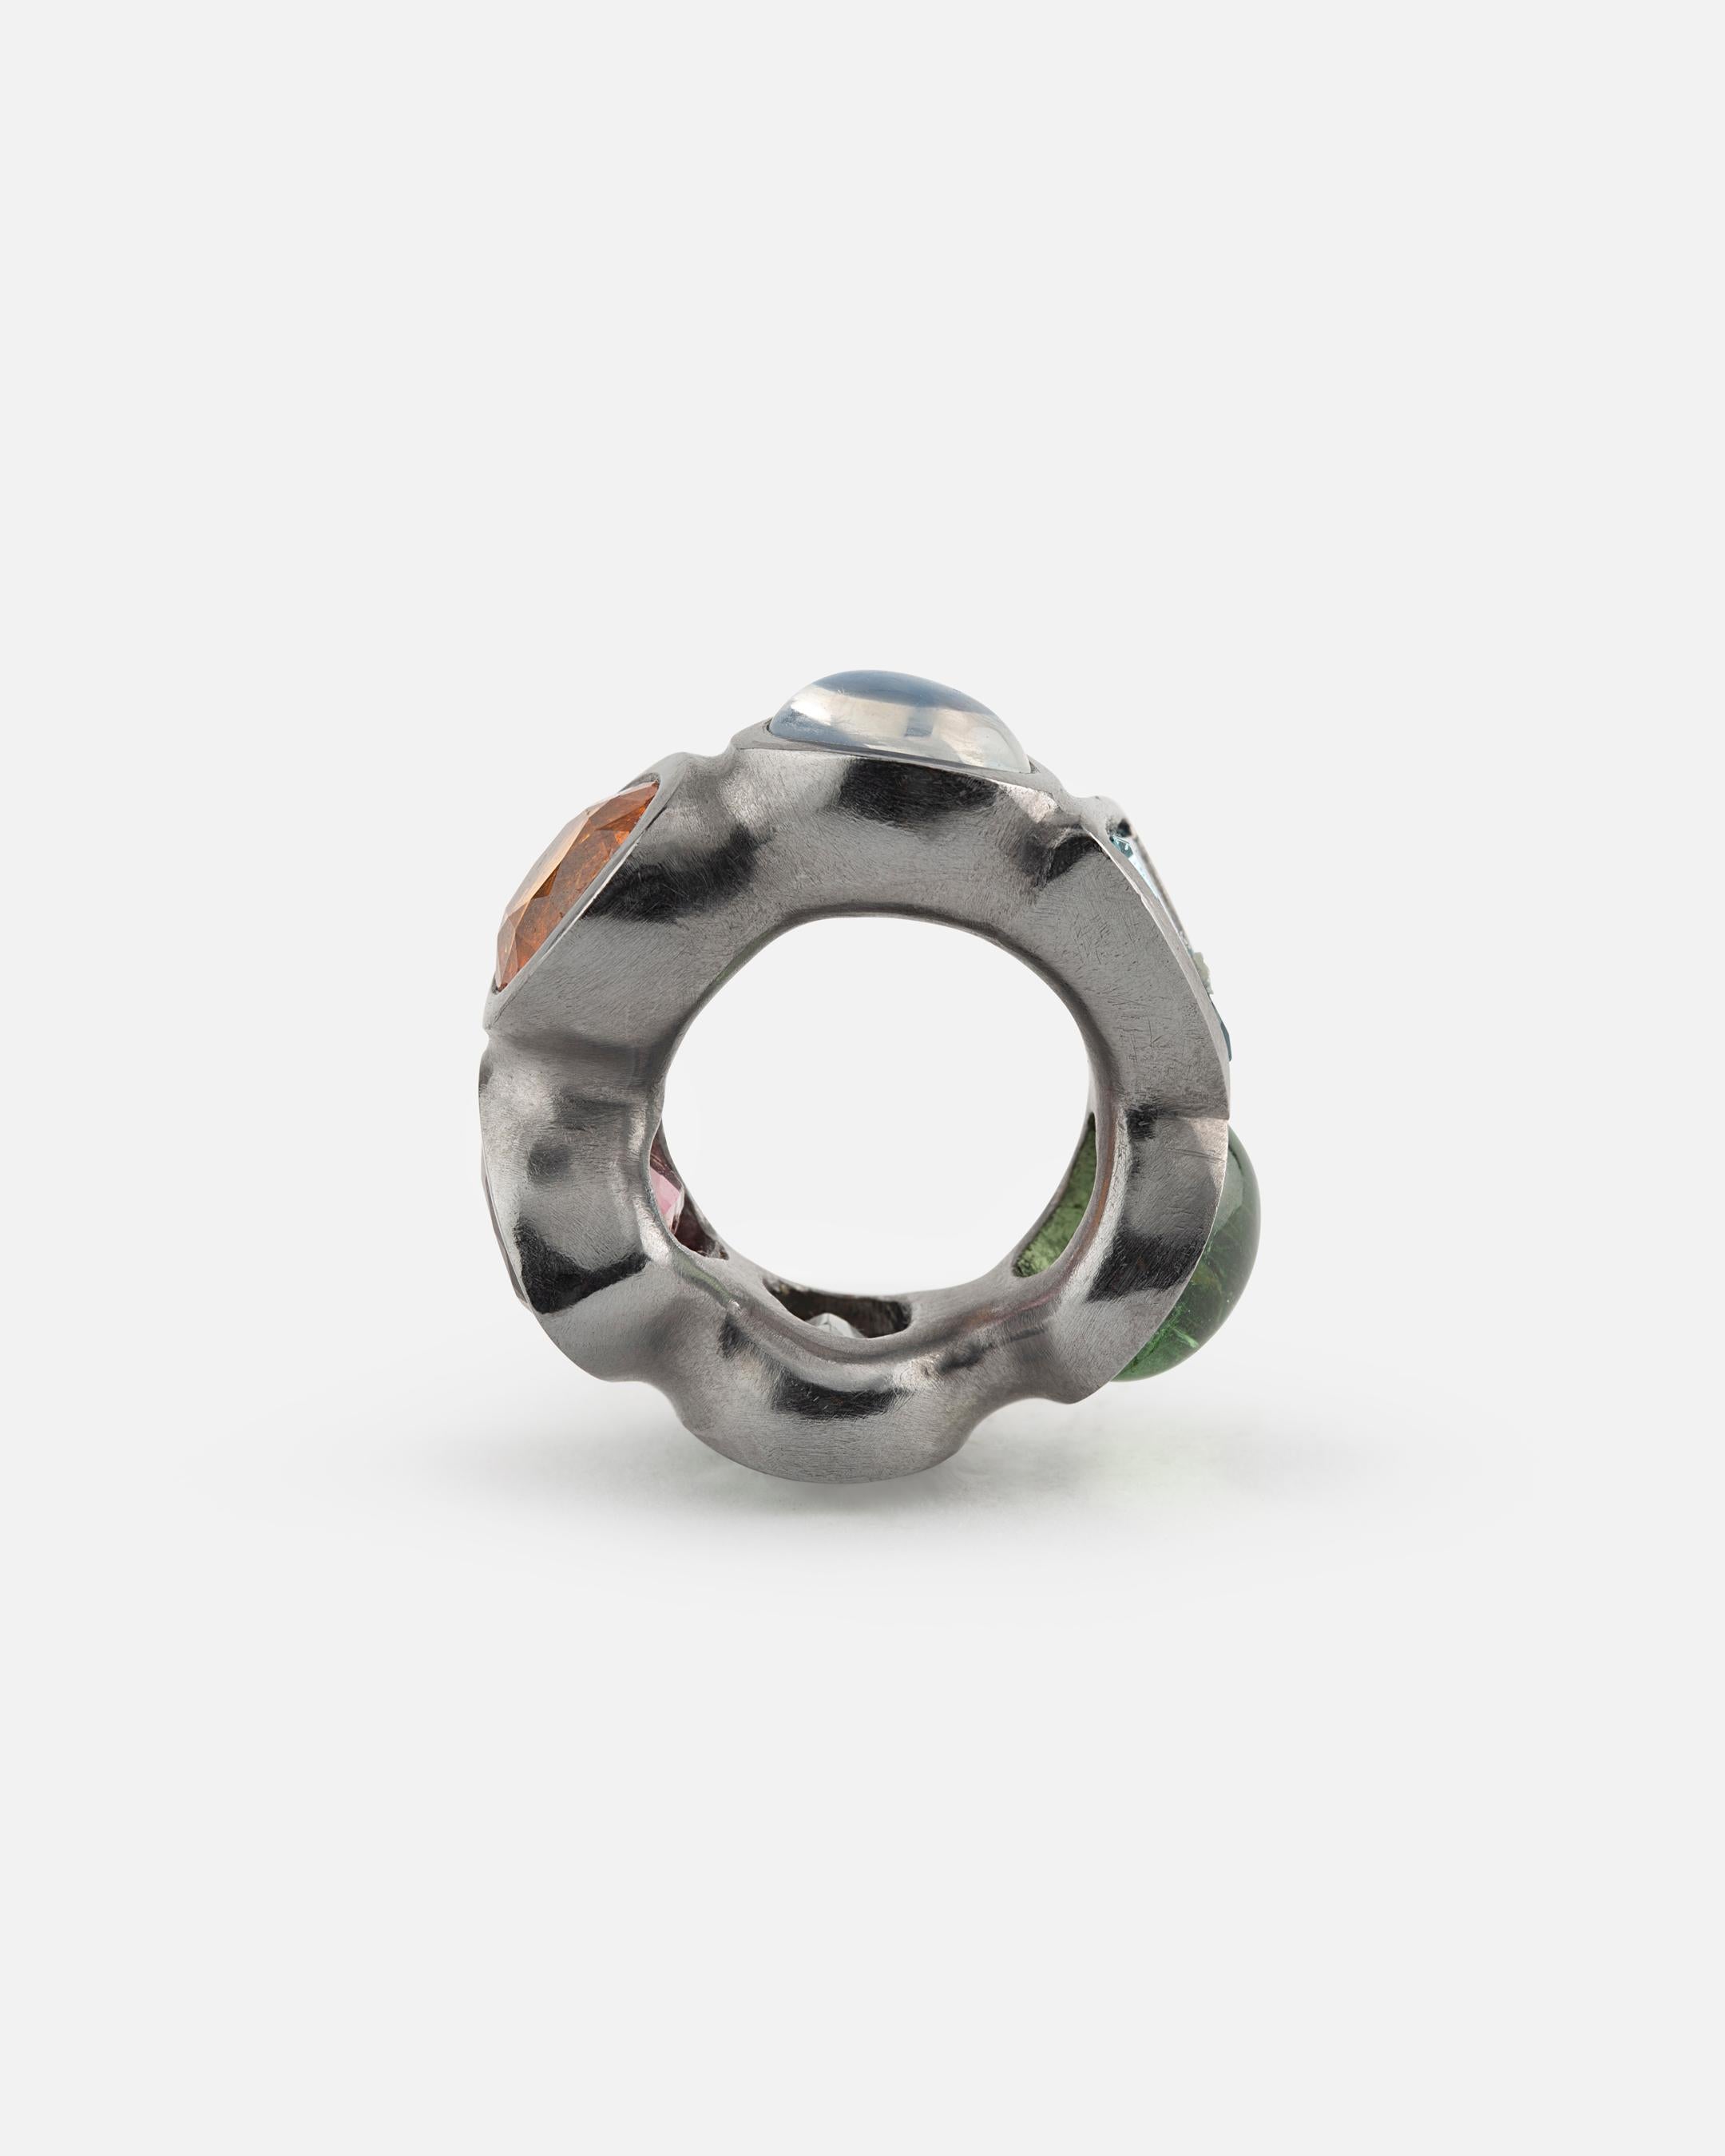 This tantalum ring is carved from one piece. The 6 big gems are pink tourmaline, white topaz, green tourmaline, aquamarine, mandarine garnet (hessonite) and moonstone. Handmade by jewelry-artist Peter Hassenpflug. 
Tantalum is a little-known